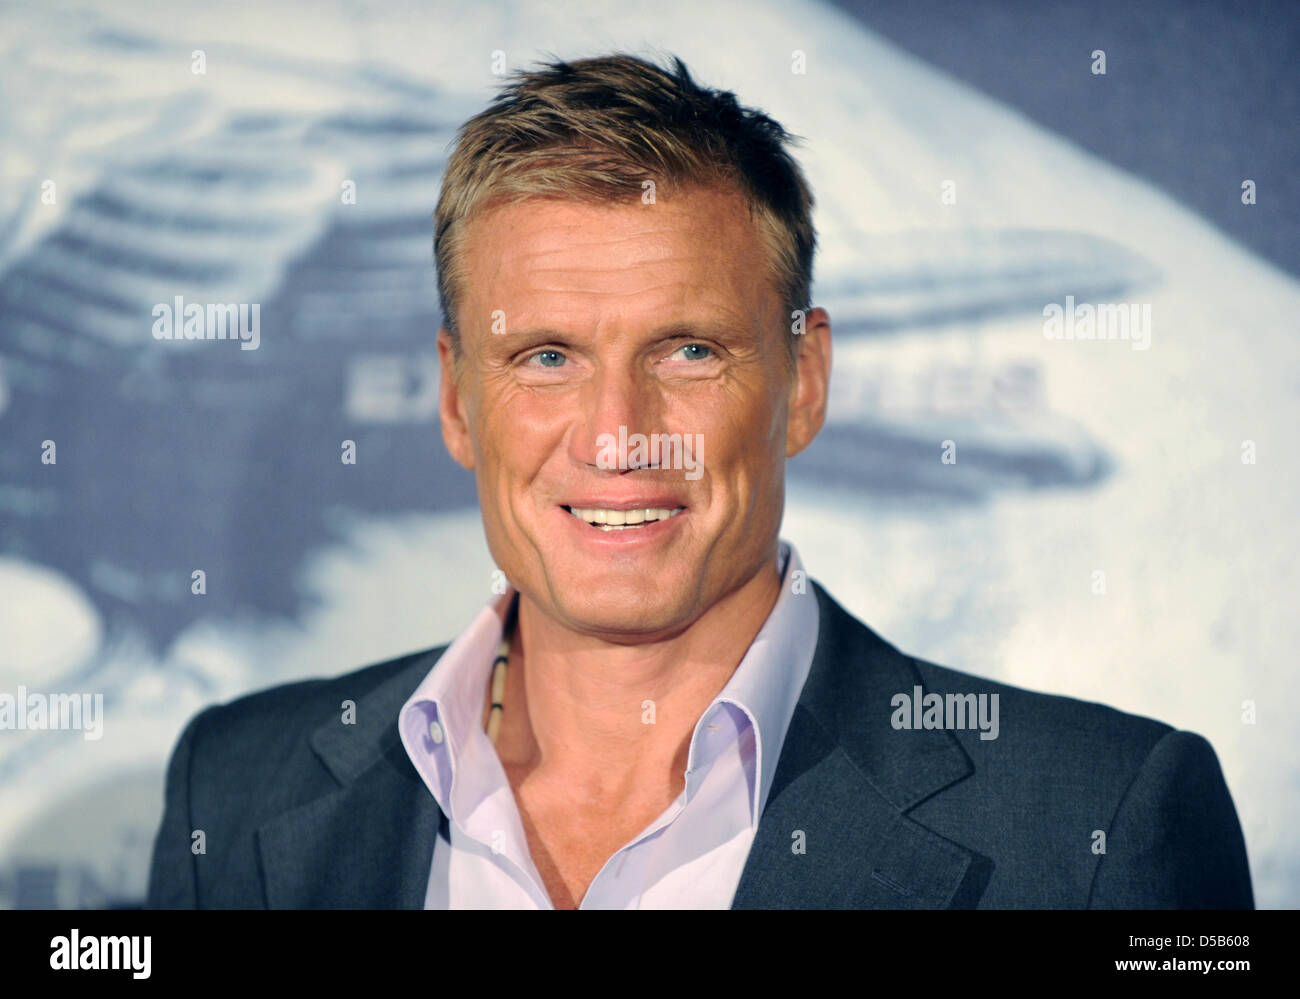 Swedish actor Dolph Lundgren smiles as he promotes his new movie 'The Expendables' in Berlin, Germany, 06 August 2010. The movie will premier 26 August 2010. Photo: Soeren Stache Stock Photo